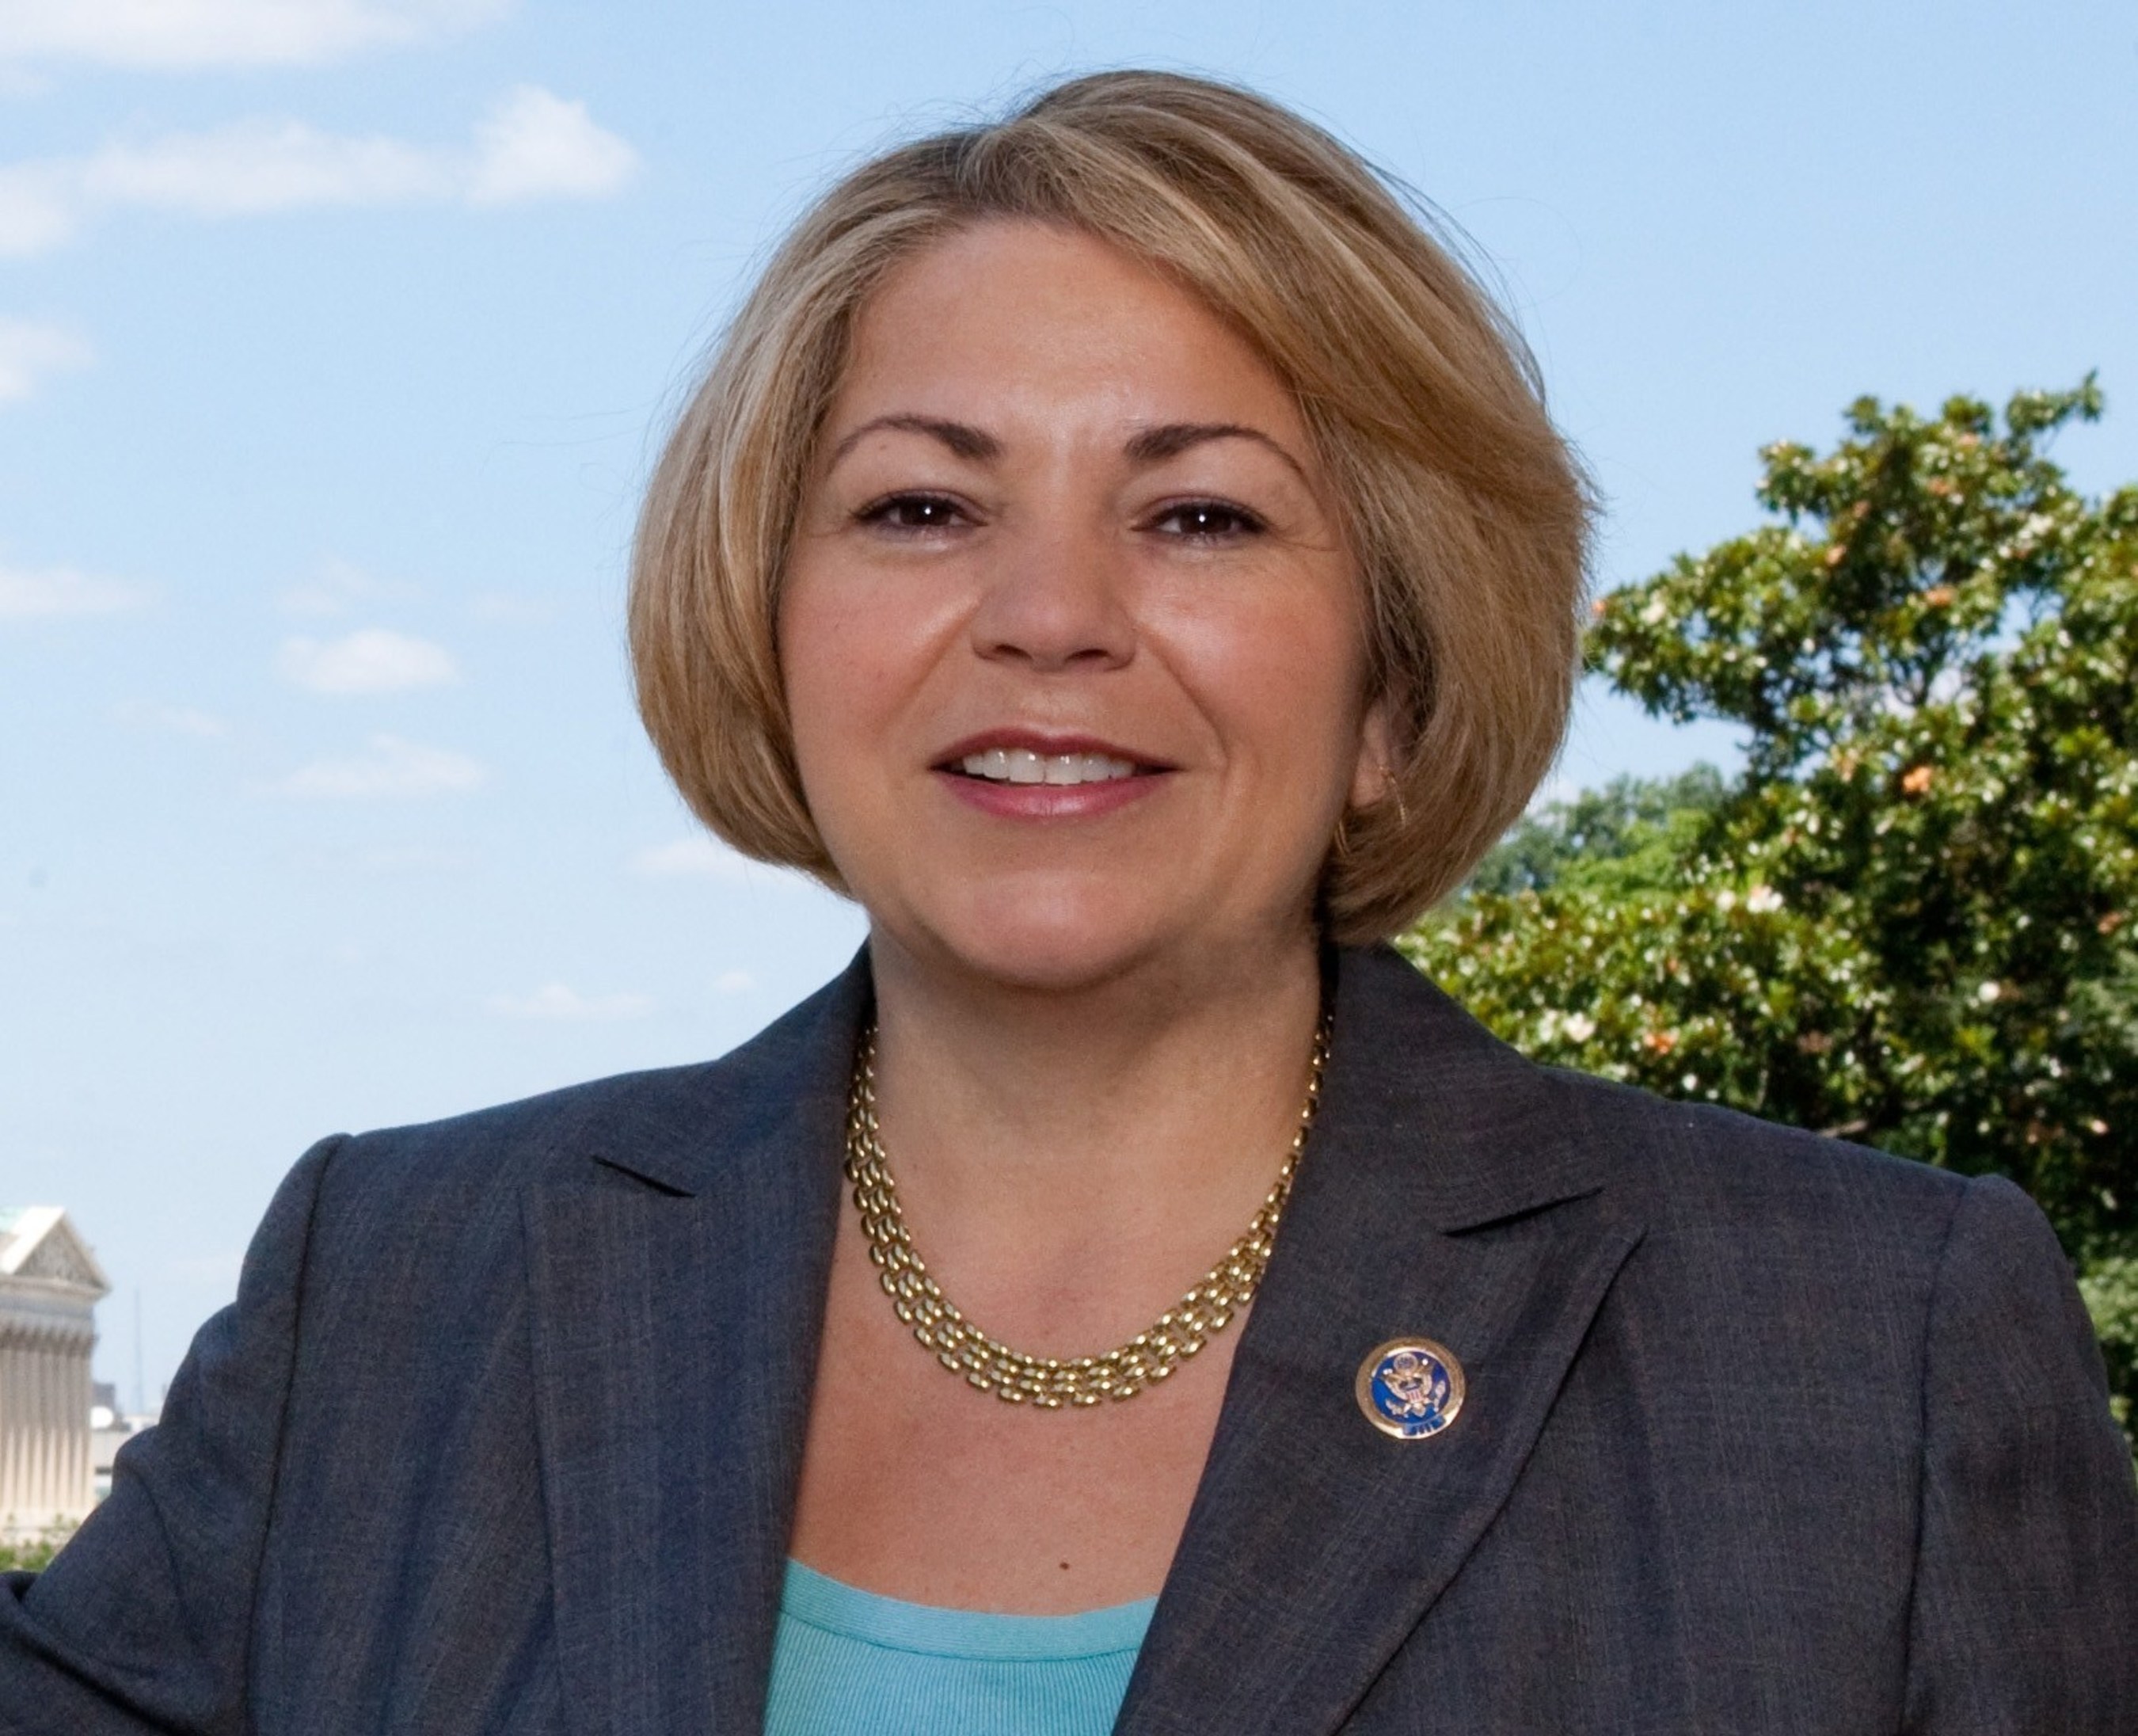 Rep. Linda Sanchez elected as new Chair of the Congressional Hispanic Caucus Institute (CHCI)